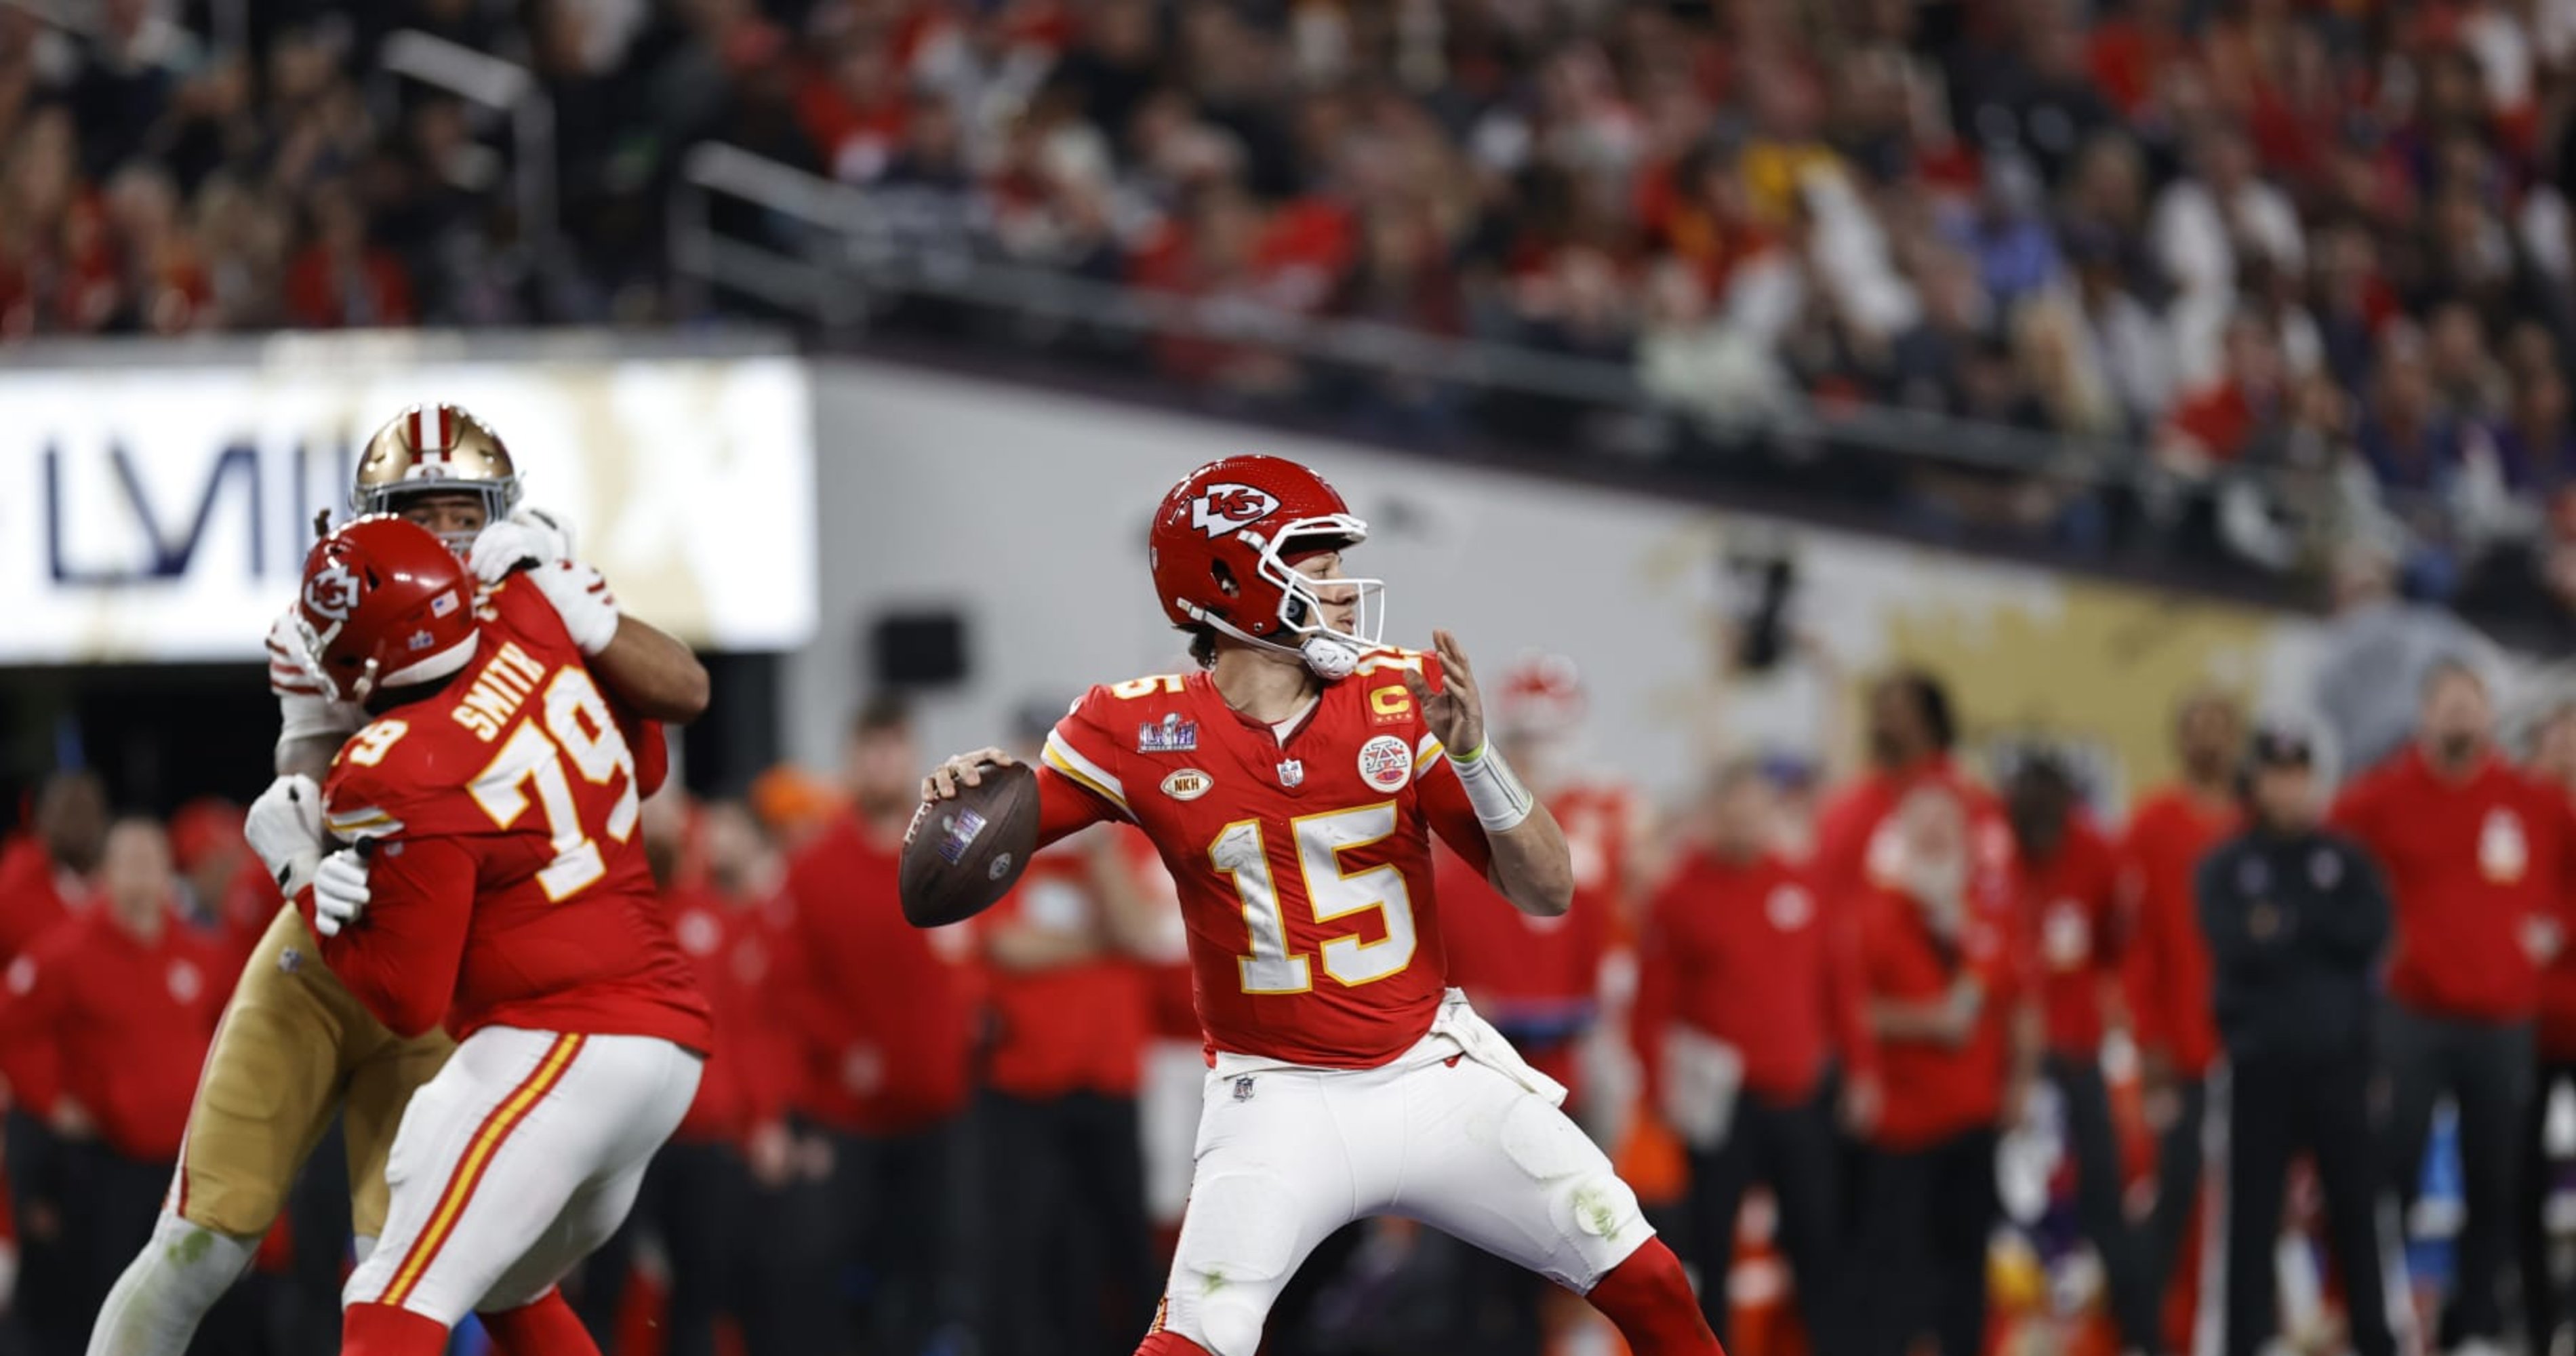 Chiefs' Patrick Mahomes Joins 99 Club in Madden NFL 25 Player Ratings; Ties Tom Brady